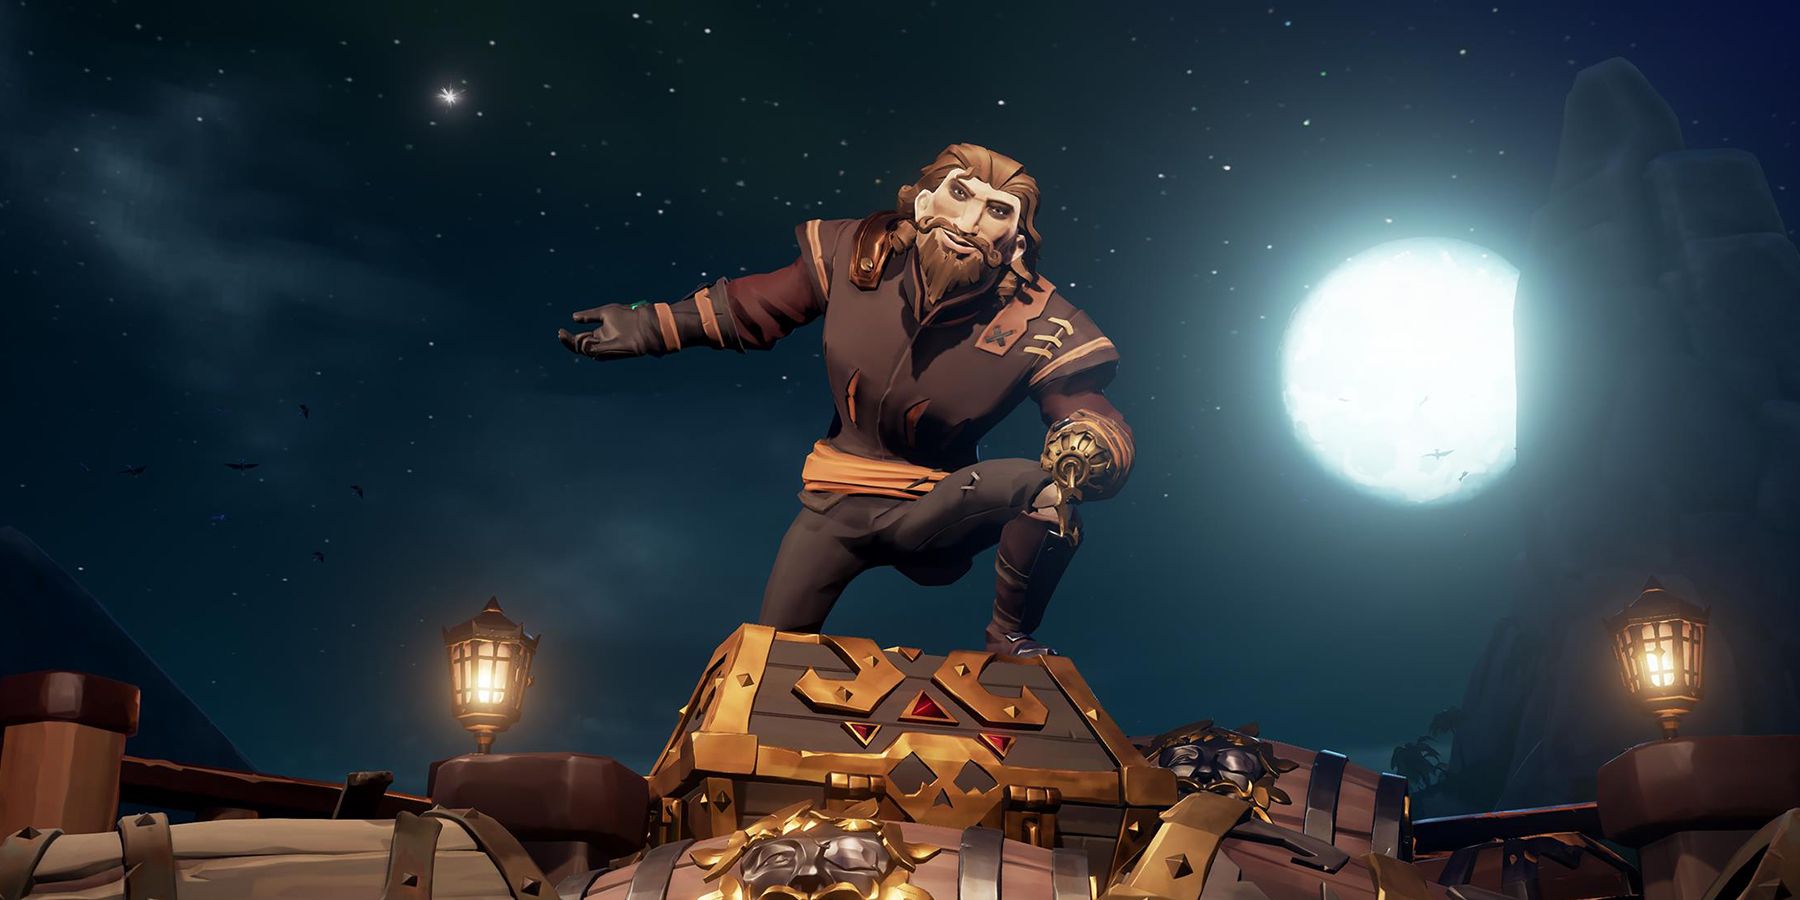 Sea of Thieves Celebrates Banjo-Kazooie’s 20th Anniversary With Something Cool